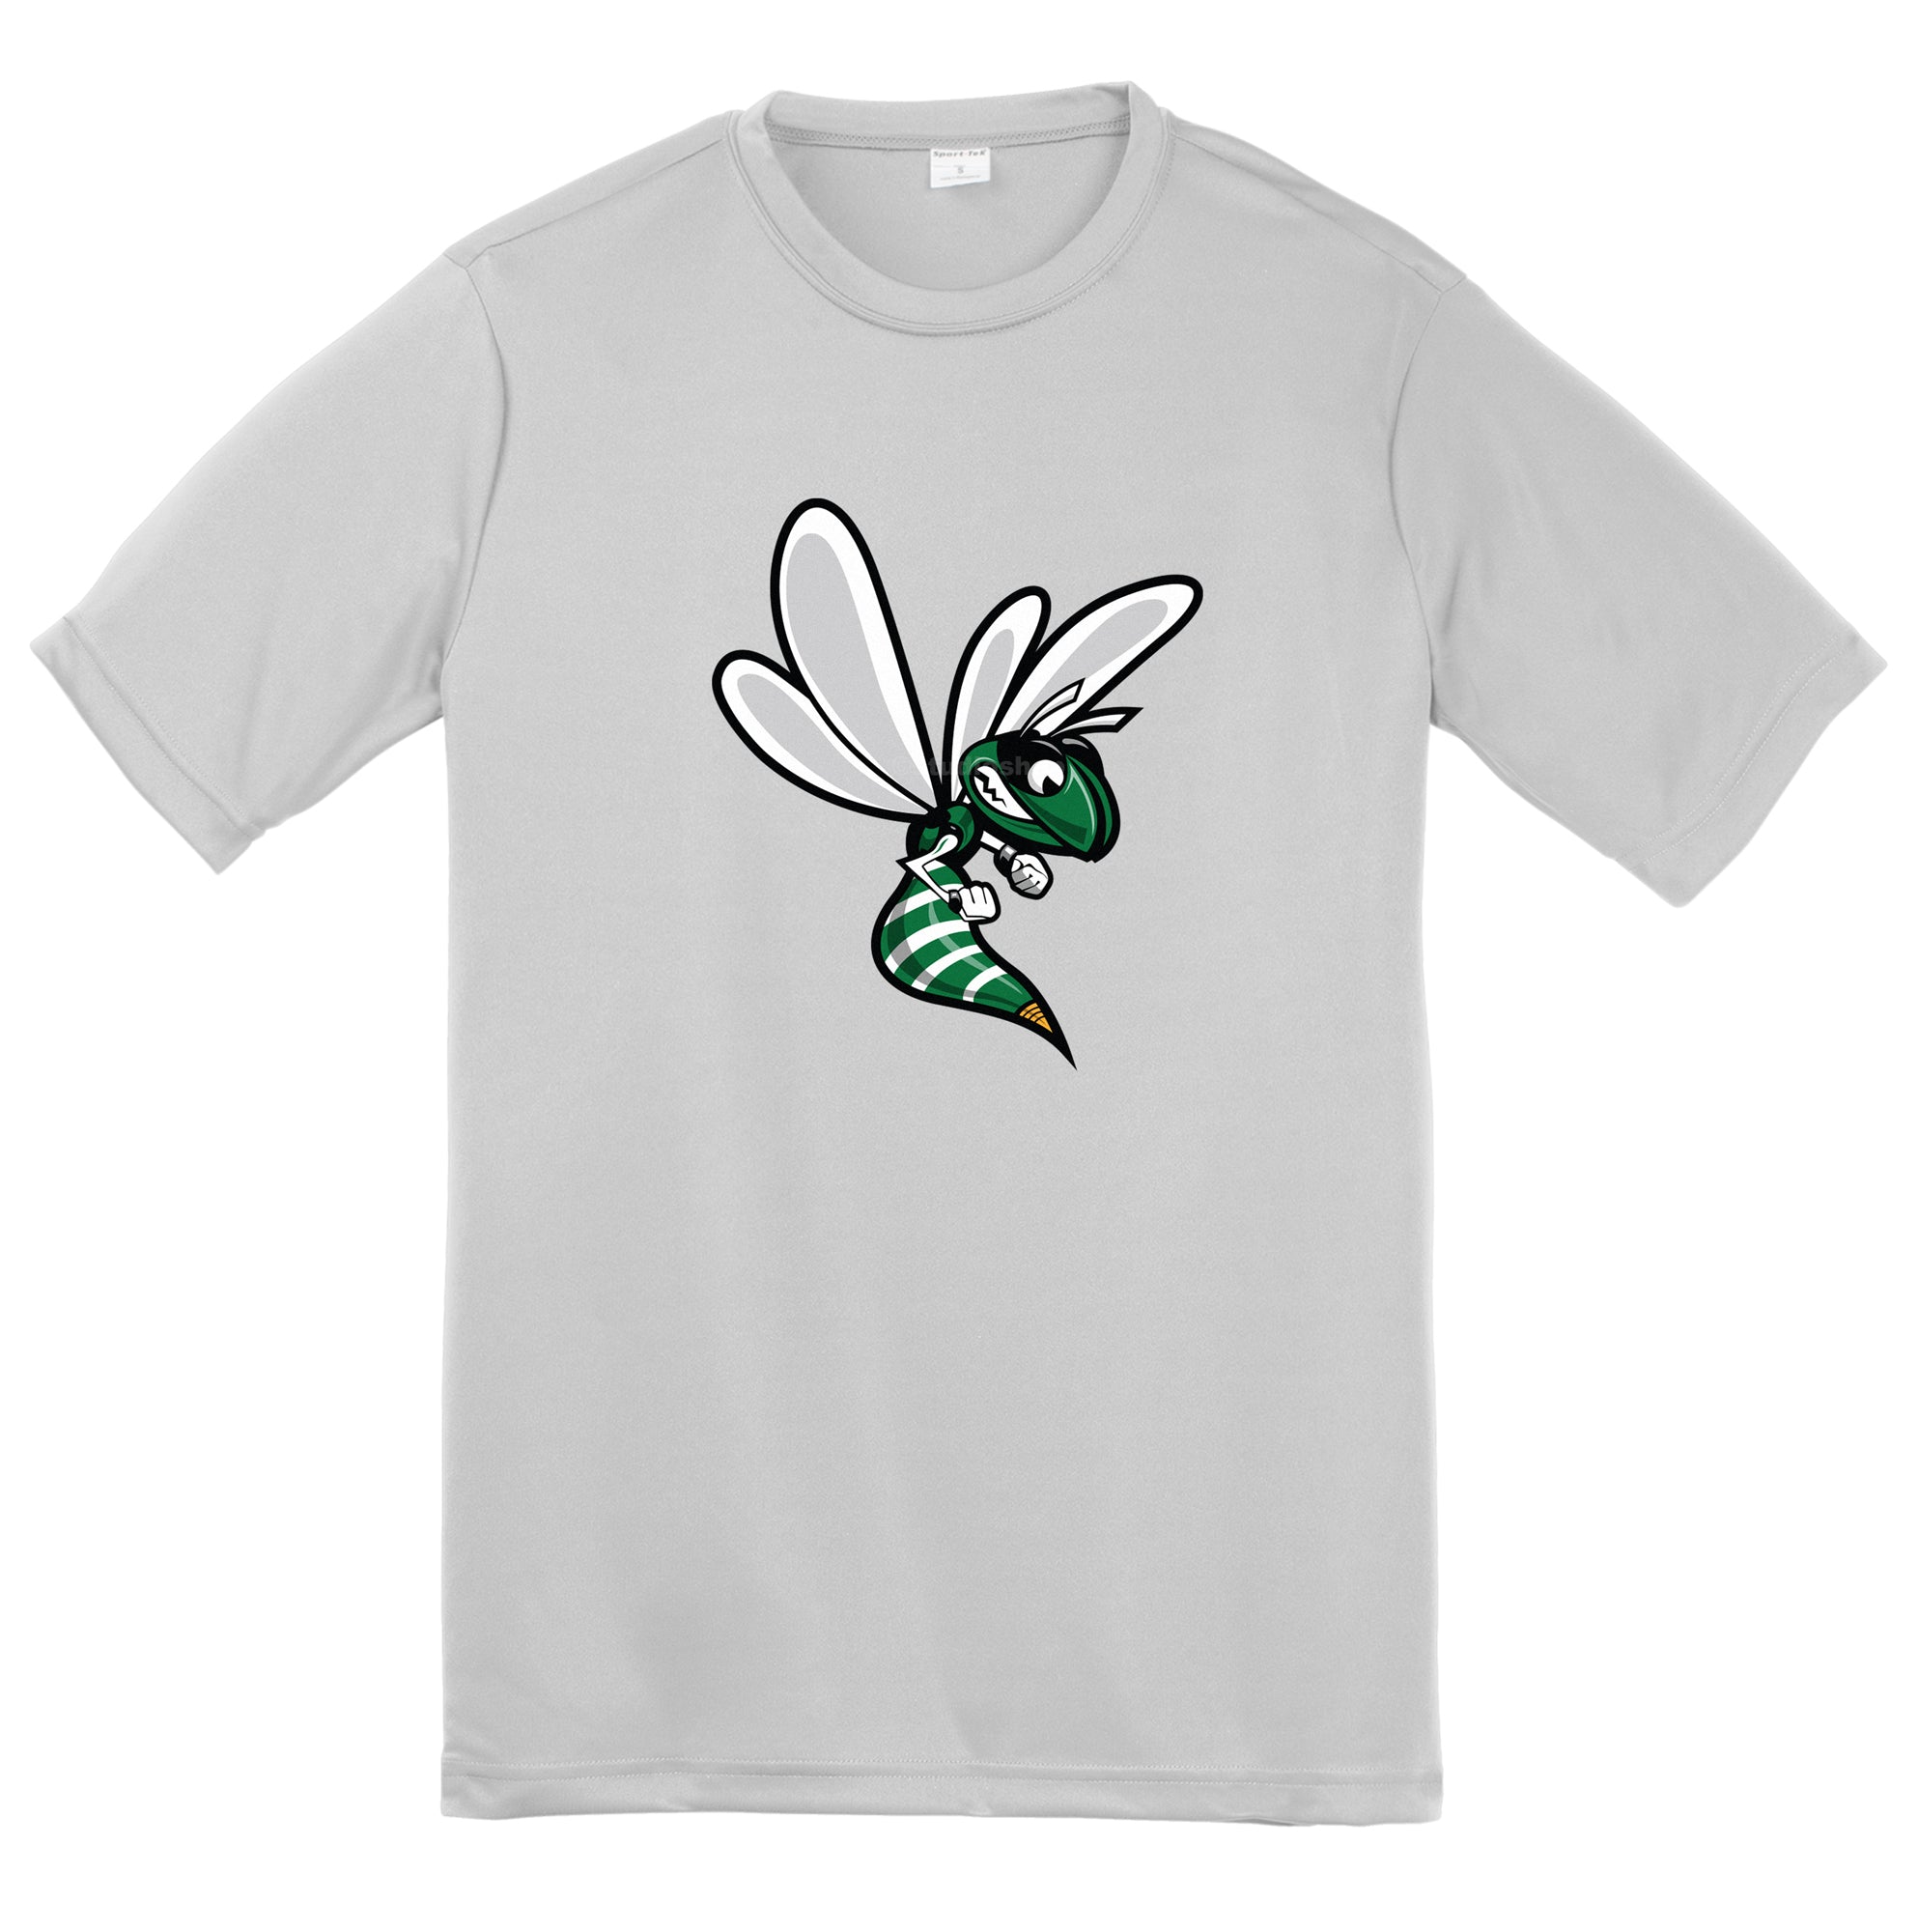 Hornet - Adult Competitor Tee